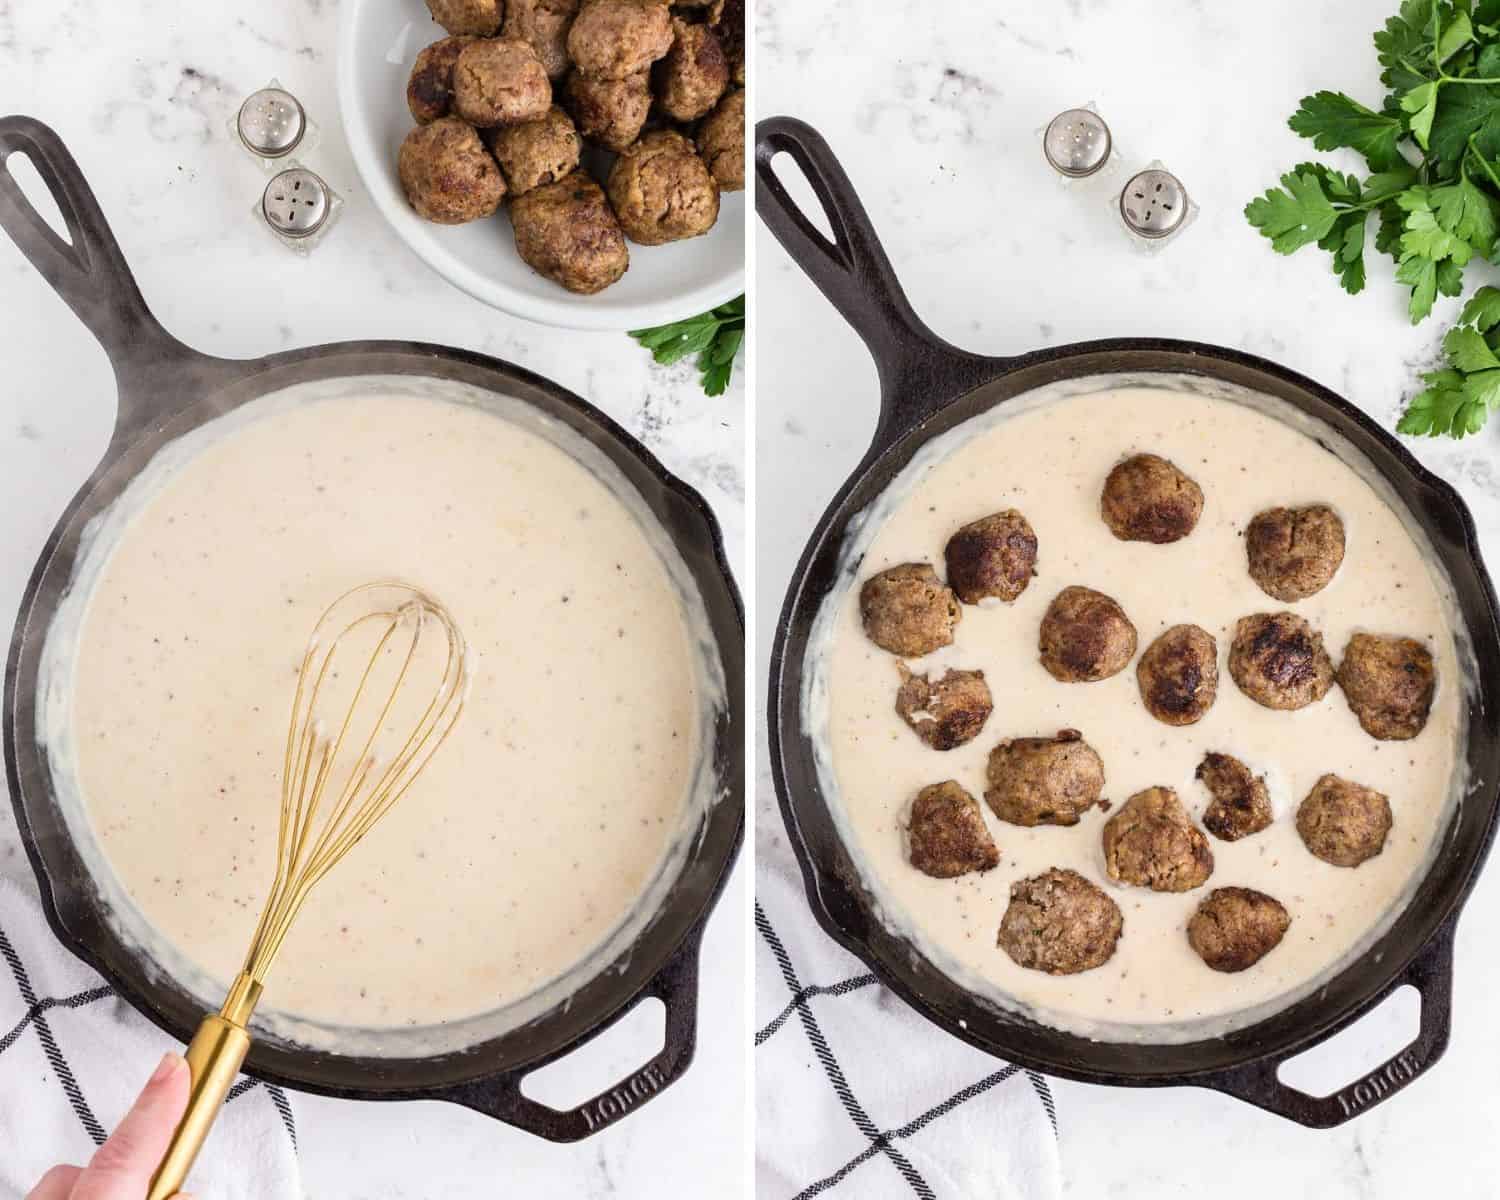 Sauce before and after adding meatballs.